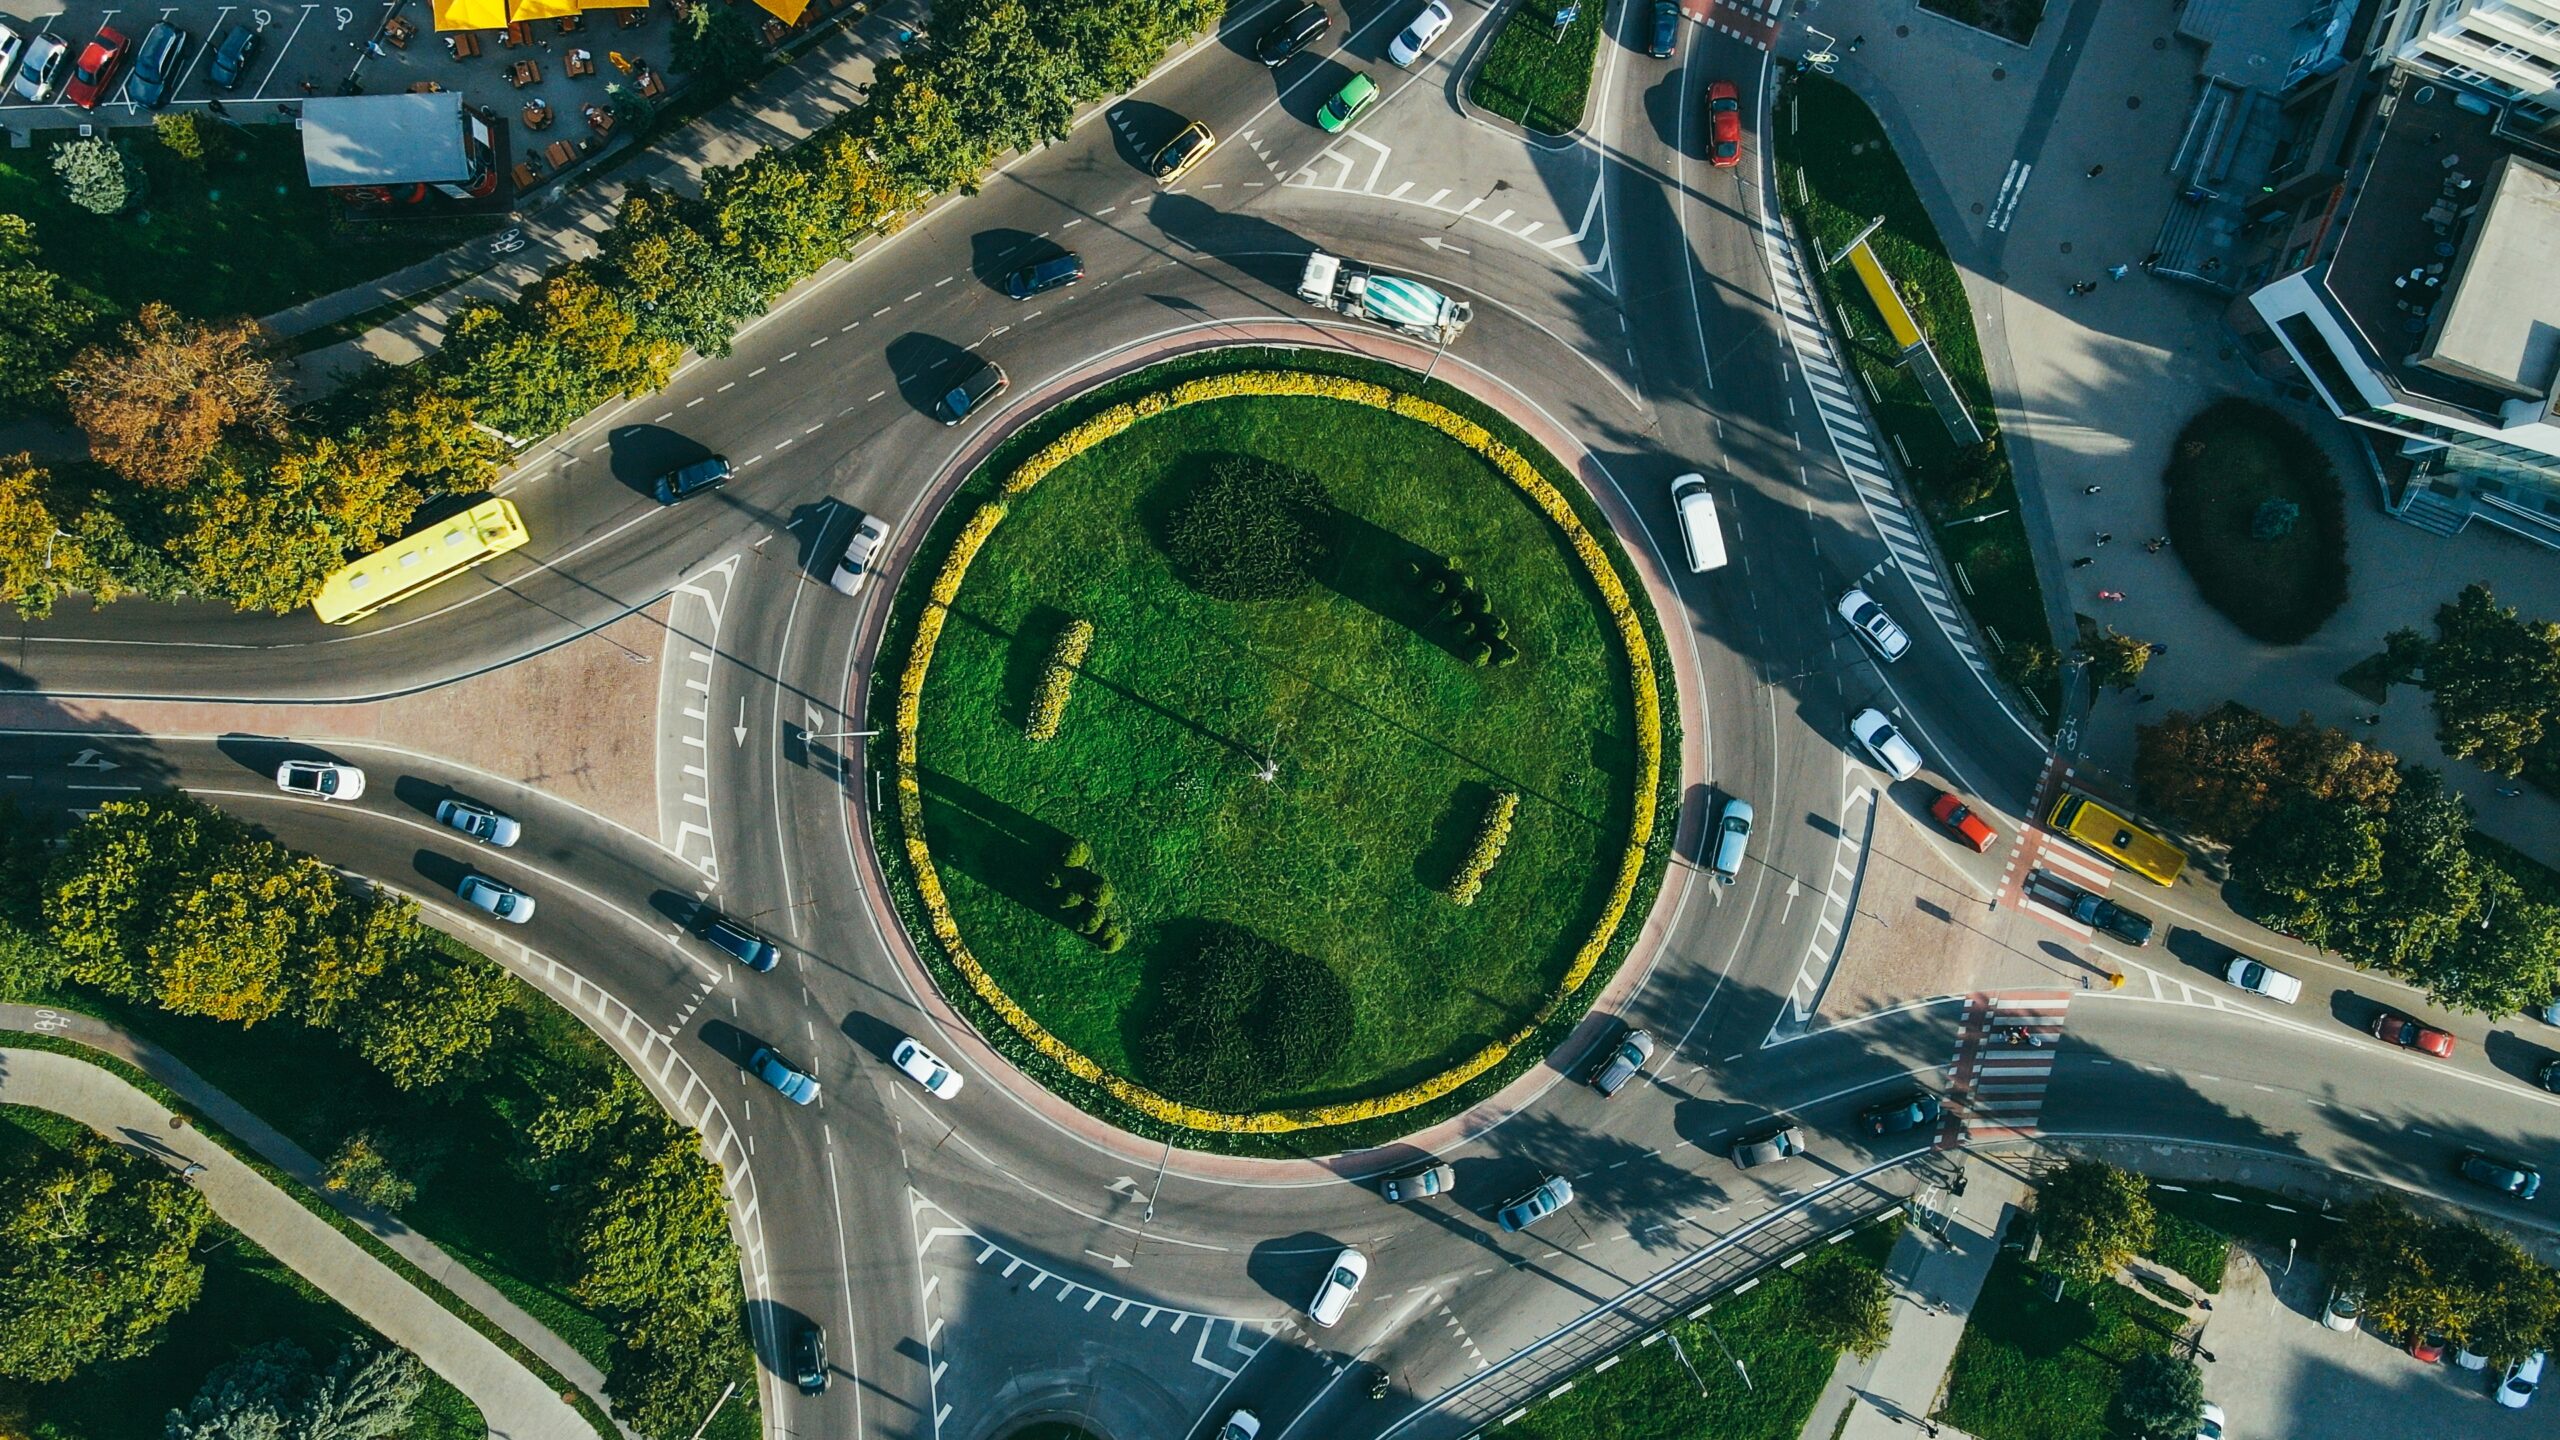 Article: Going Circular in Infrastructure